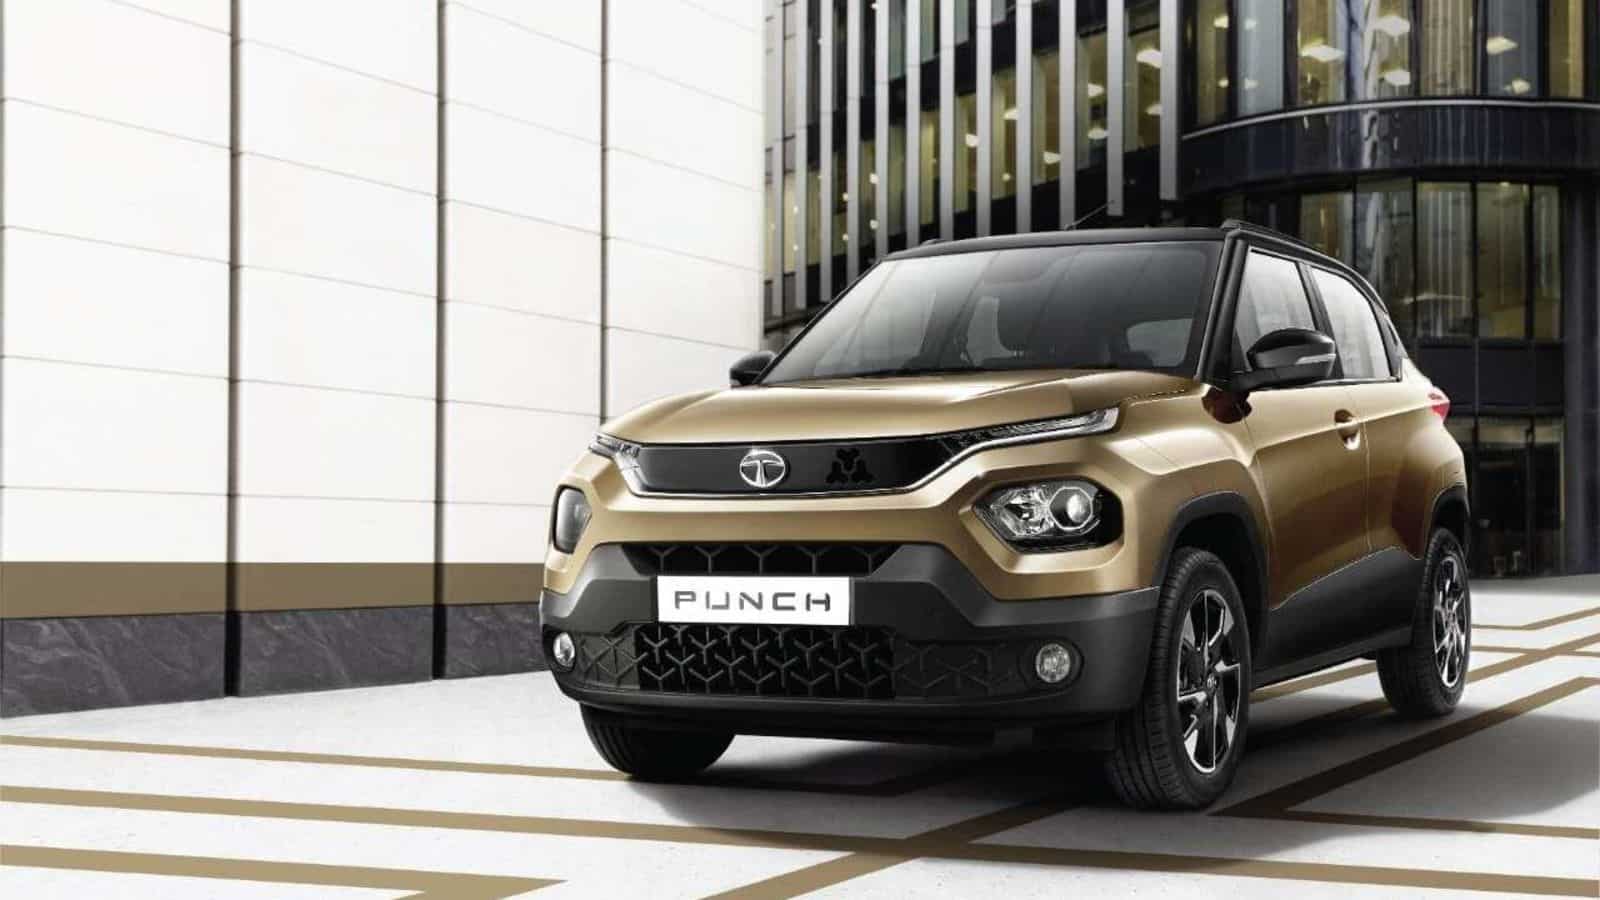 Tata Punch micro SUV unveiled: things you should know